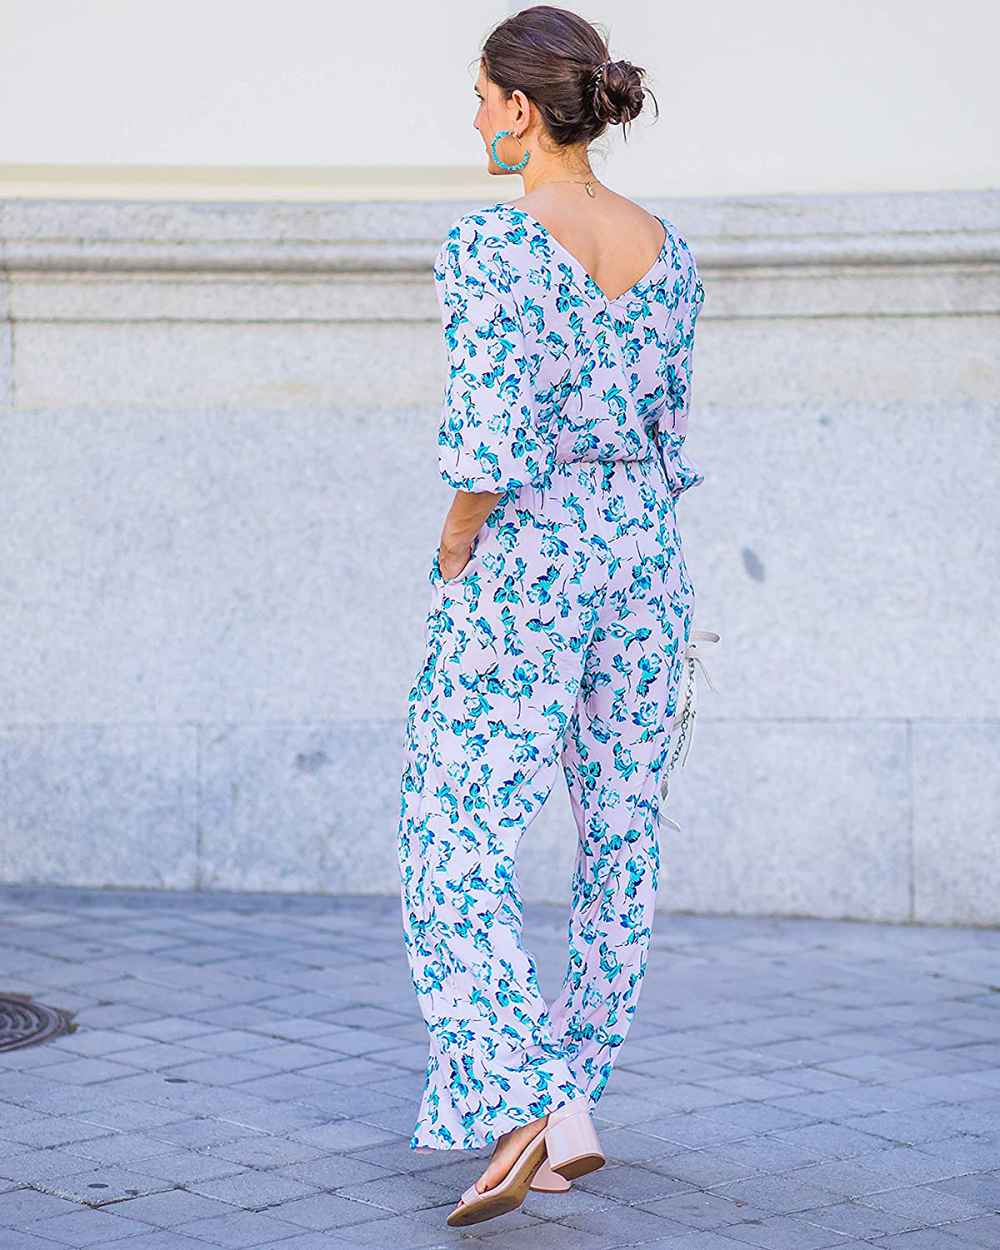 The Drop Women's Floral Print Crossover Jumpsuit by @balamoda